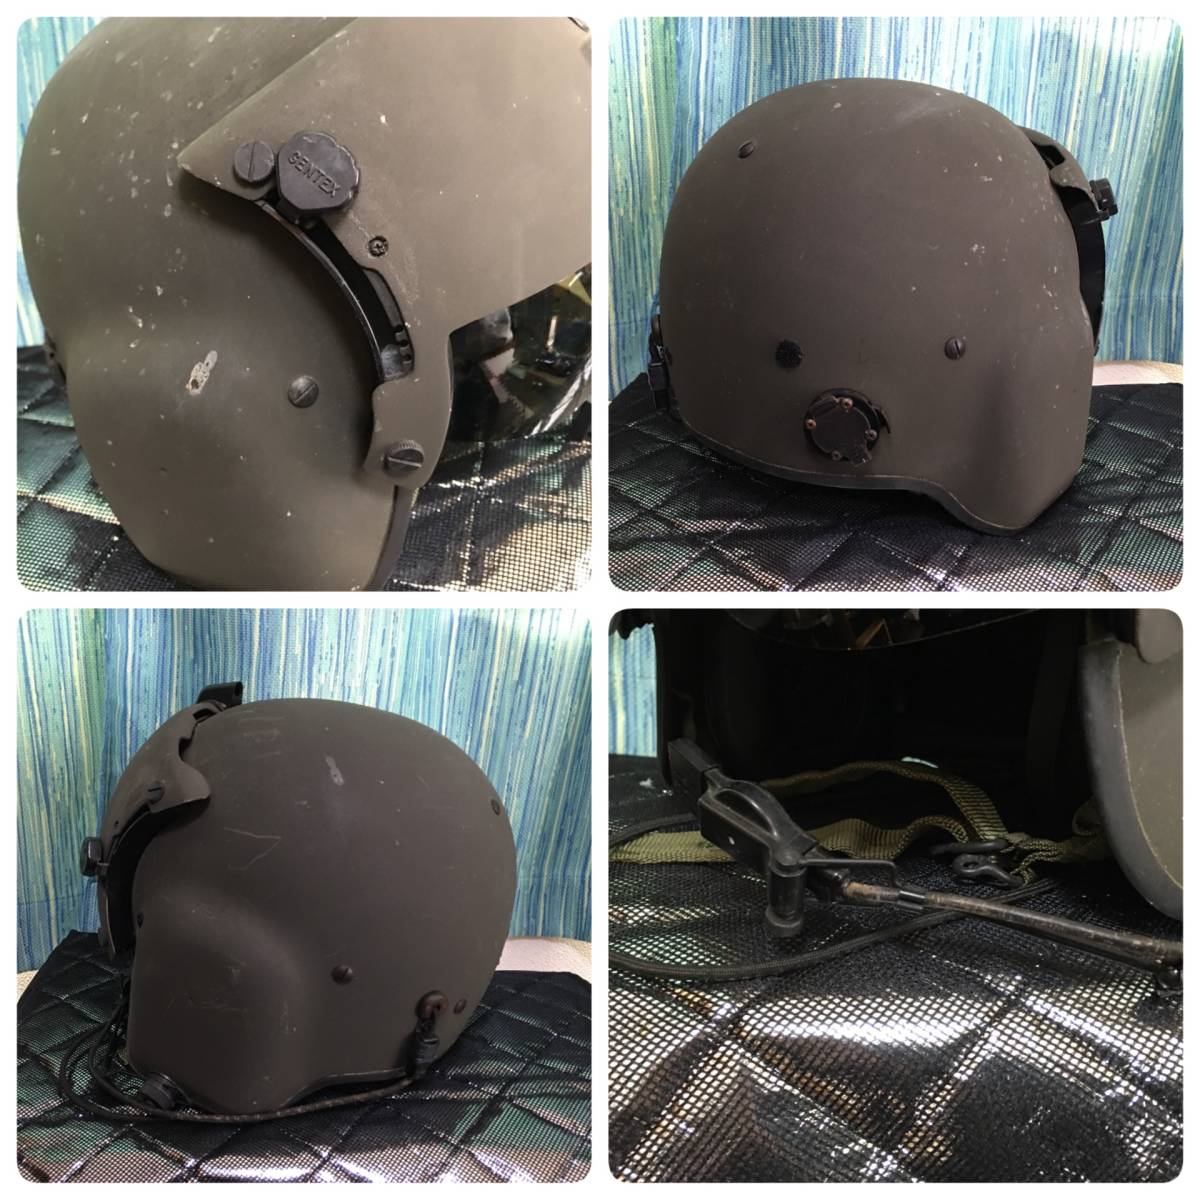 Gentex HGU-56/P Pilot helmet search ) jet worn the US armed forces navy land army military 